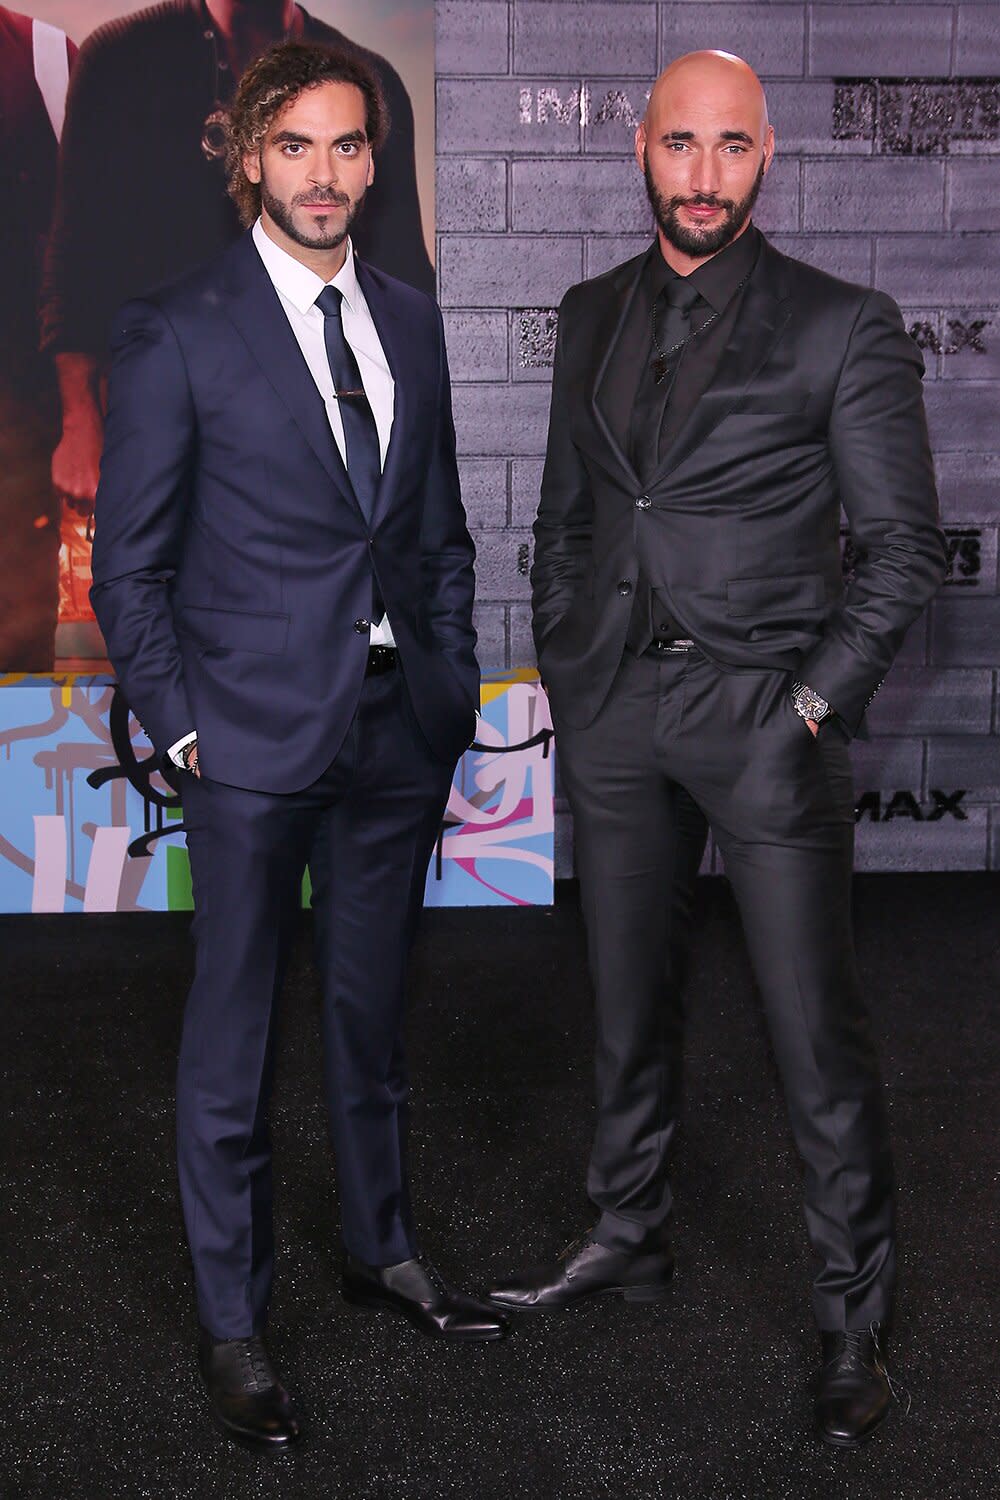 Directors Adil El Arbi and Bilall Fallah attend the World Premiere of "Bad Boys for Life" at TCL Chinese Theatre on January 14, 2020 in Hollywood, California.